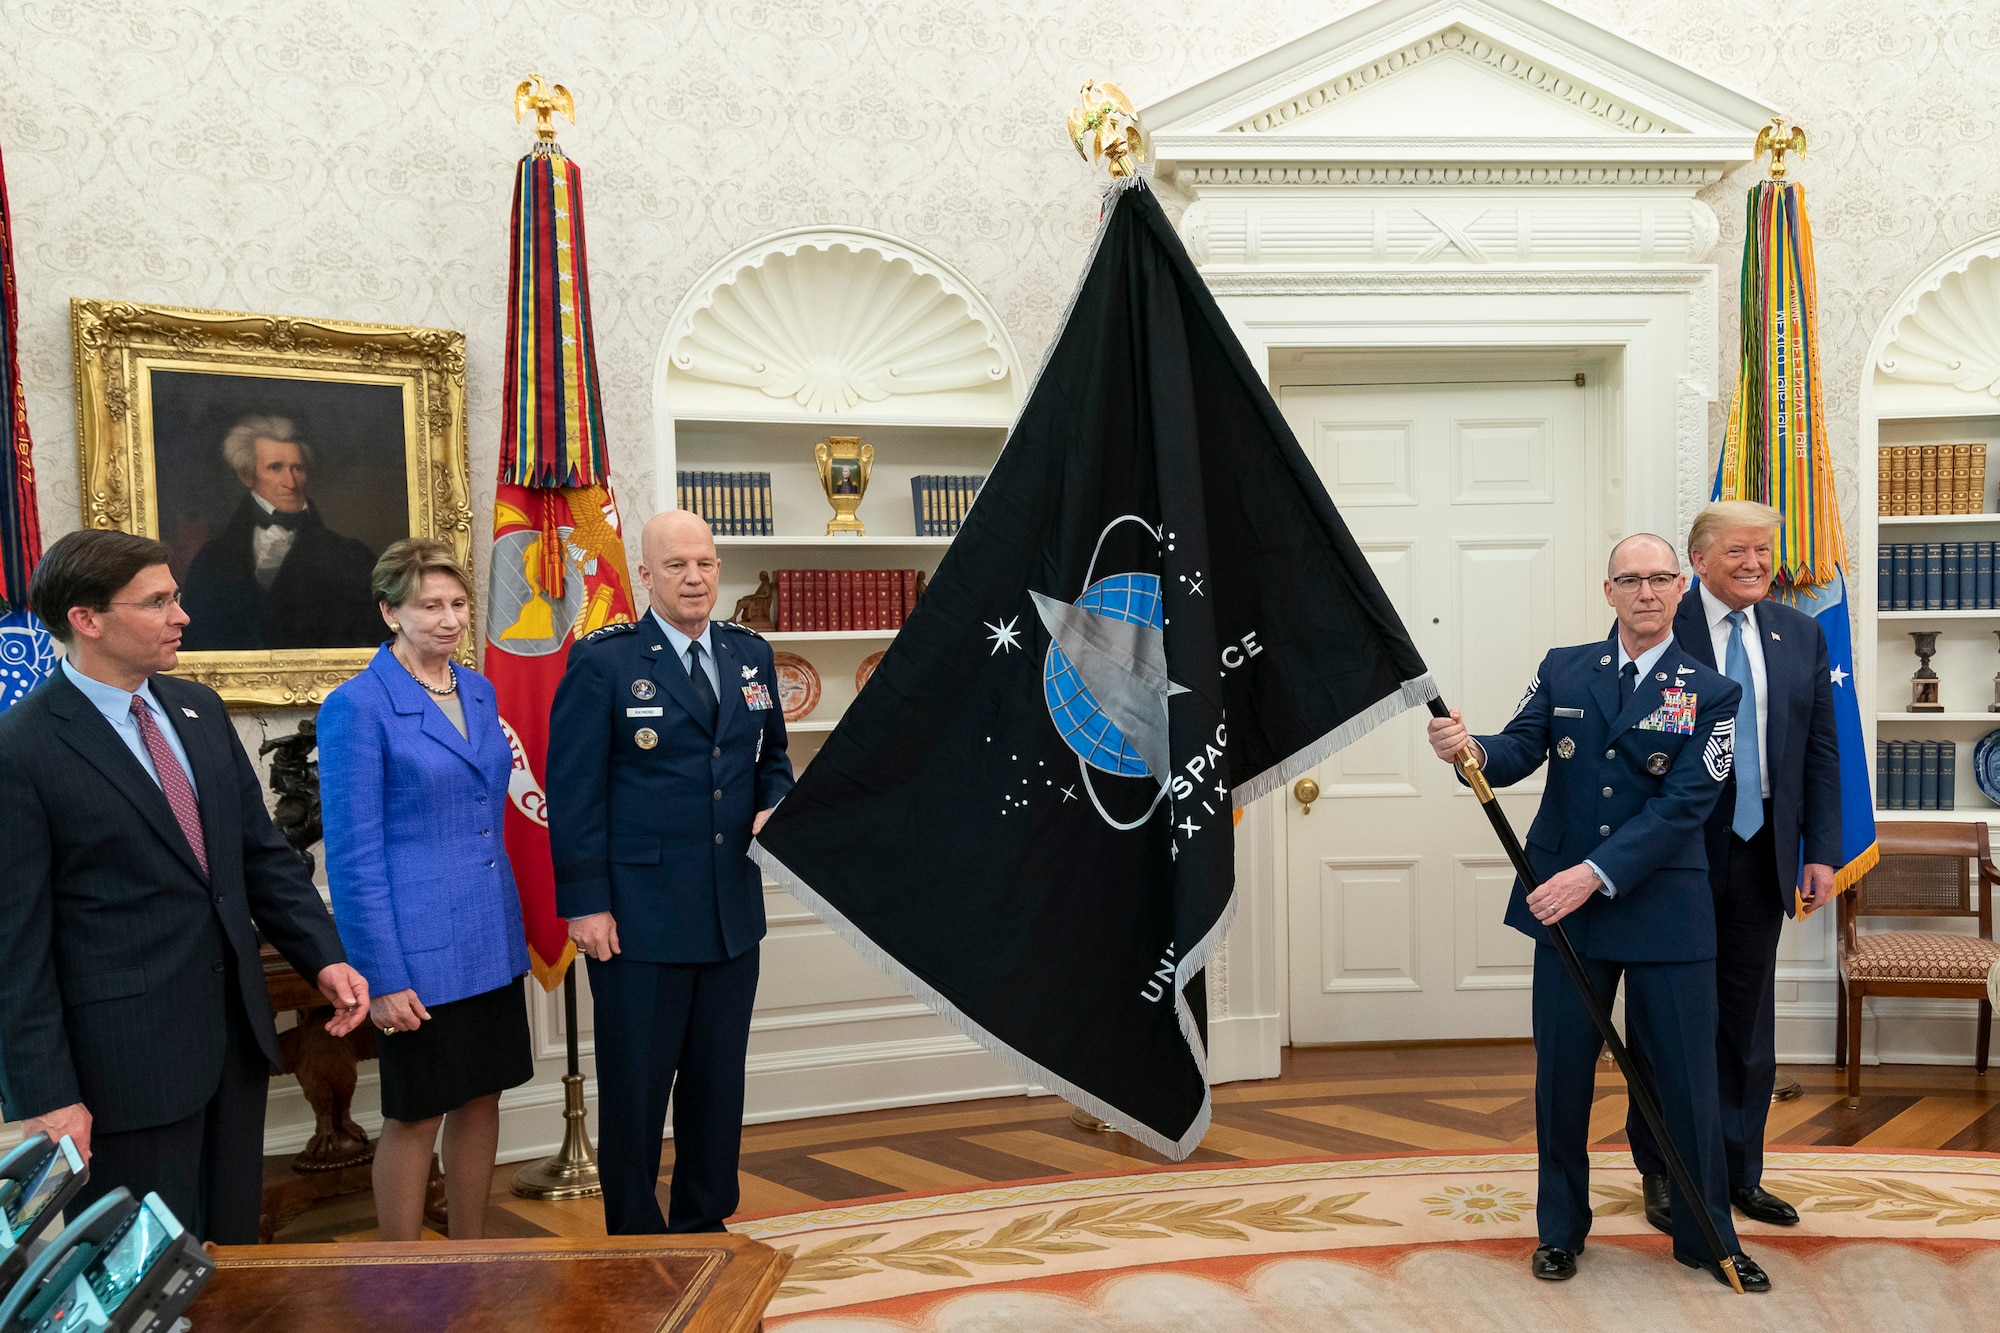 U.S. Space Command commander Gen. John W. “Jay” Raymond and Senior Enlisted Advisor Chief Master Sgt. Roger Towberman present President Donald J. Trump with the Space Force flag in the Oval Office of the White House, May 15, 2020.